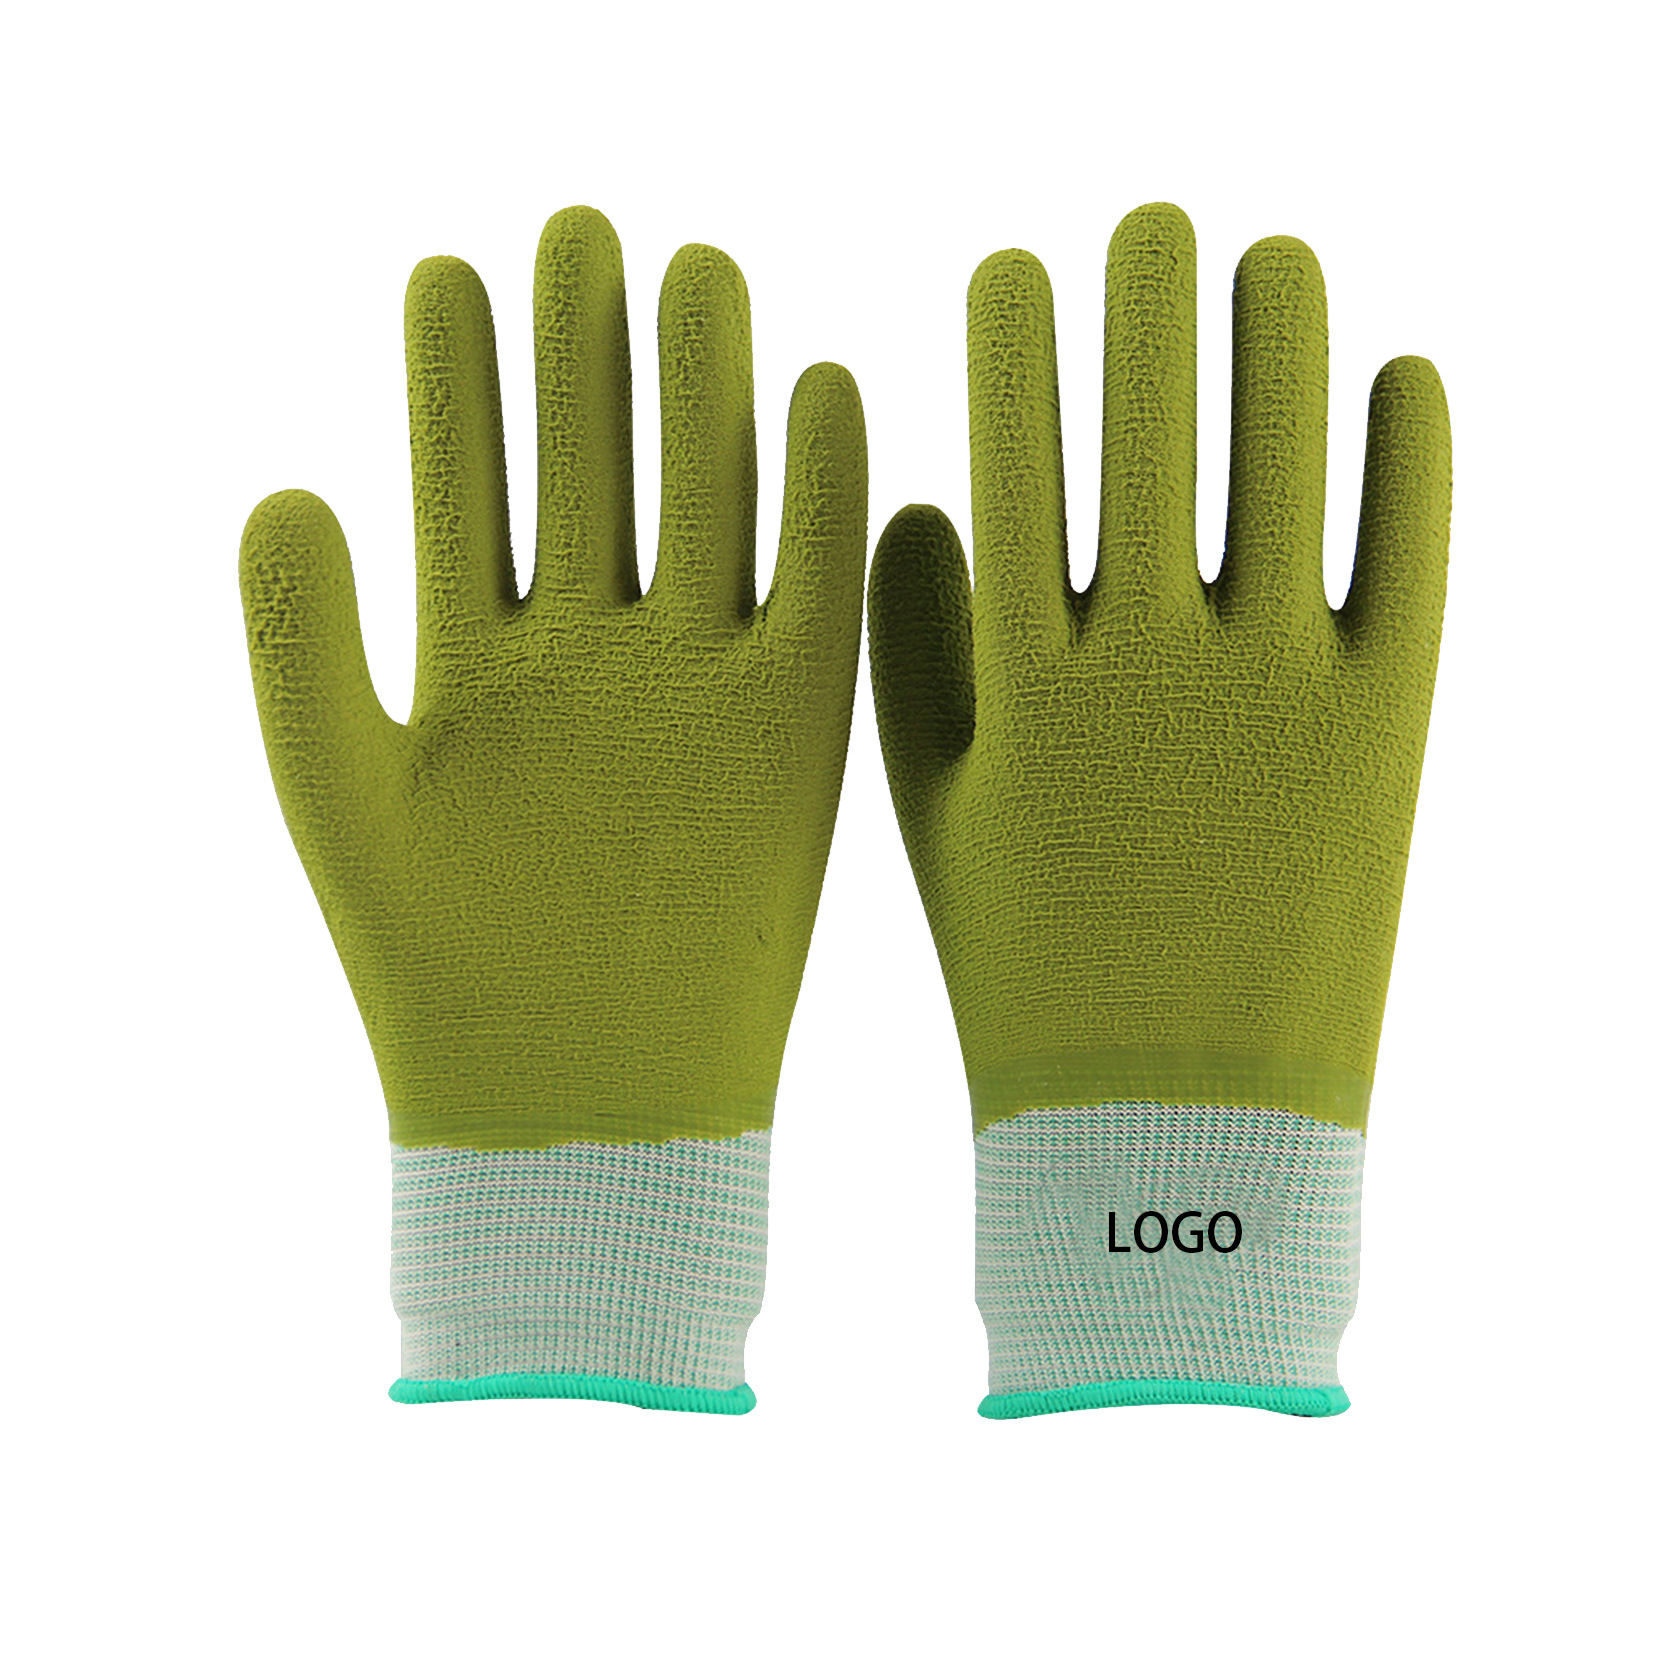 Foam Latex Coated Winter Gardening and Work Gloves